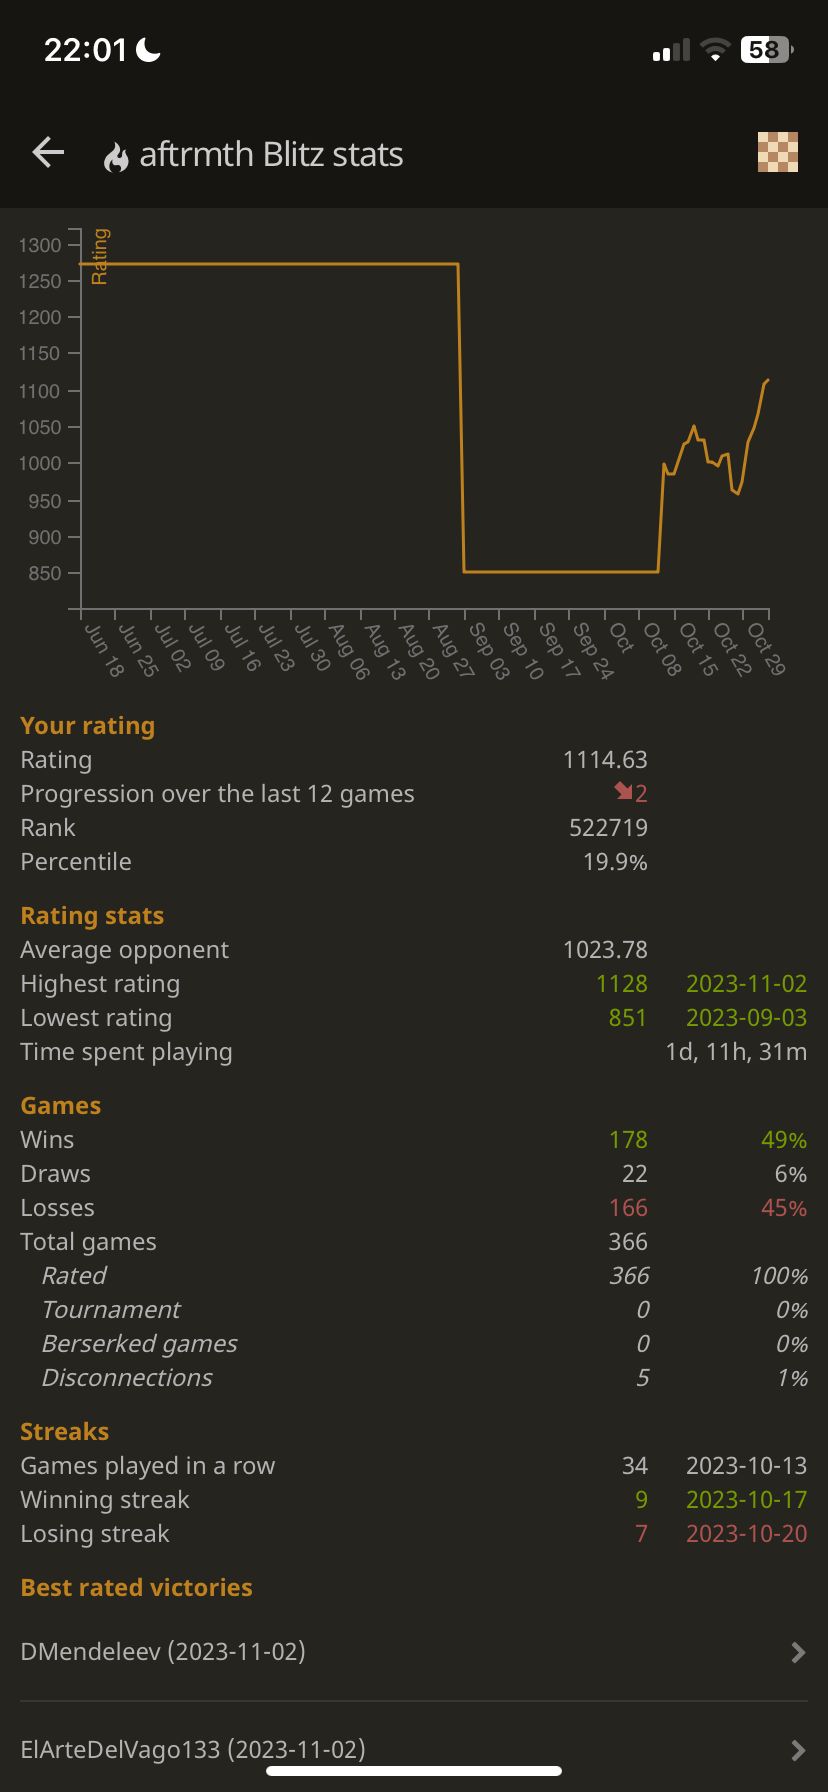 Blitz stats: what's up with the percentile? - Chess Forums 